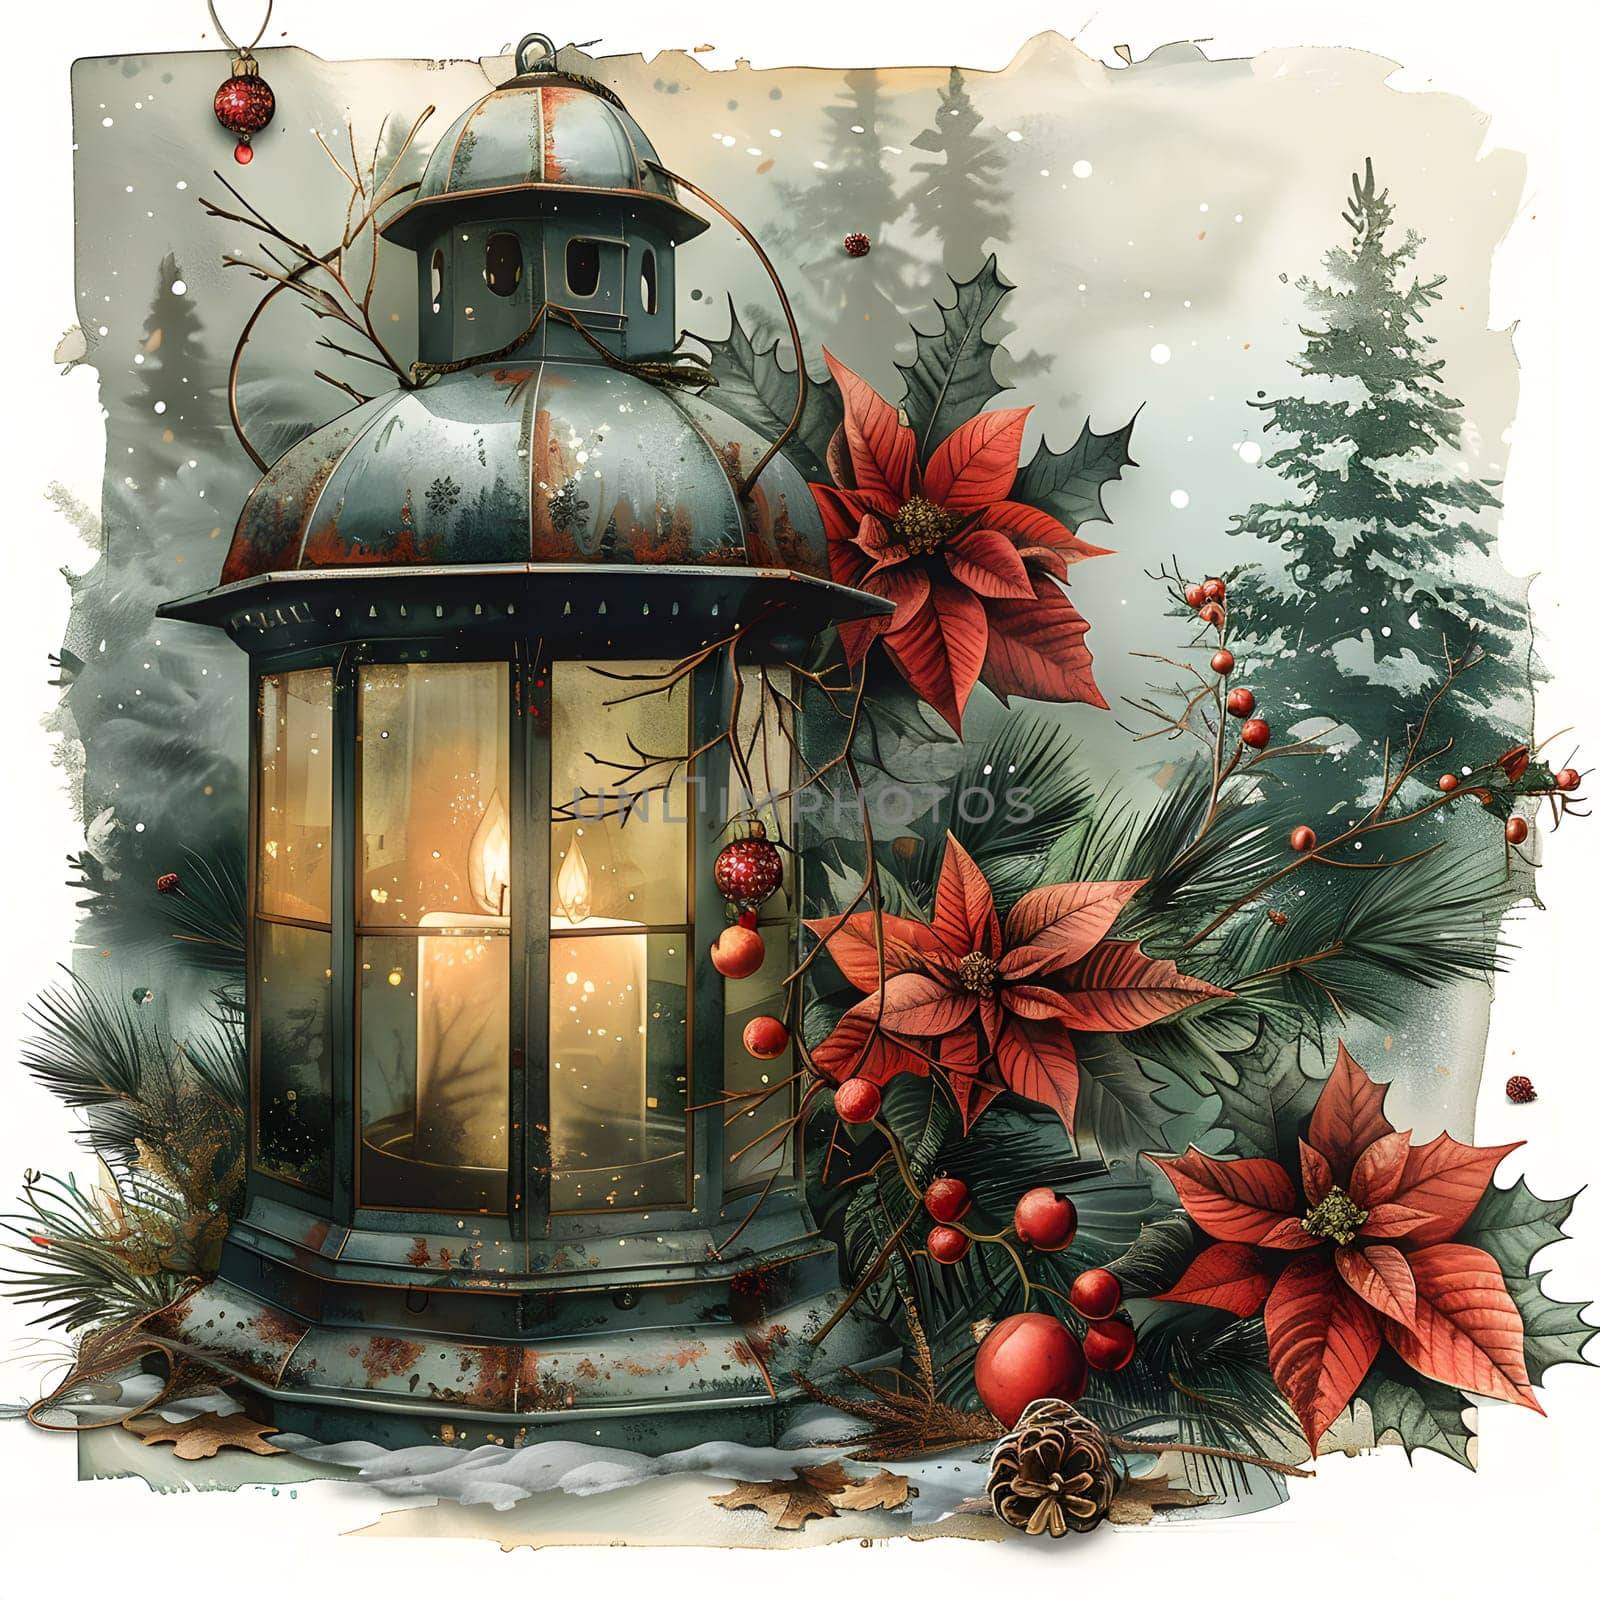 A rectangular lantern is adorned with evergreen branches, poinsettia flowers, and pine cones, creating a festive Christmas decoration